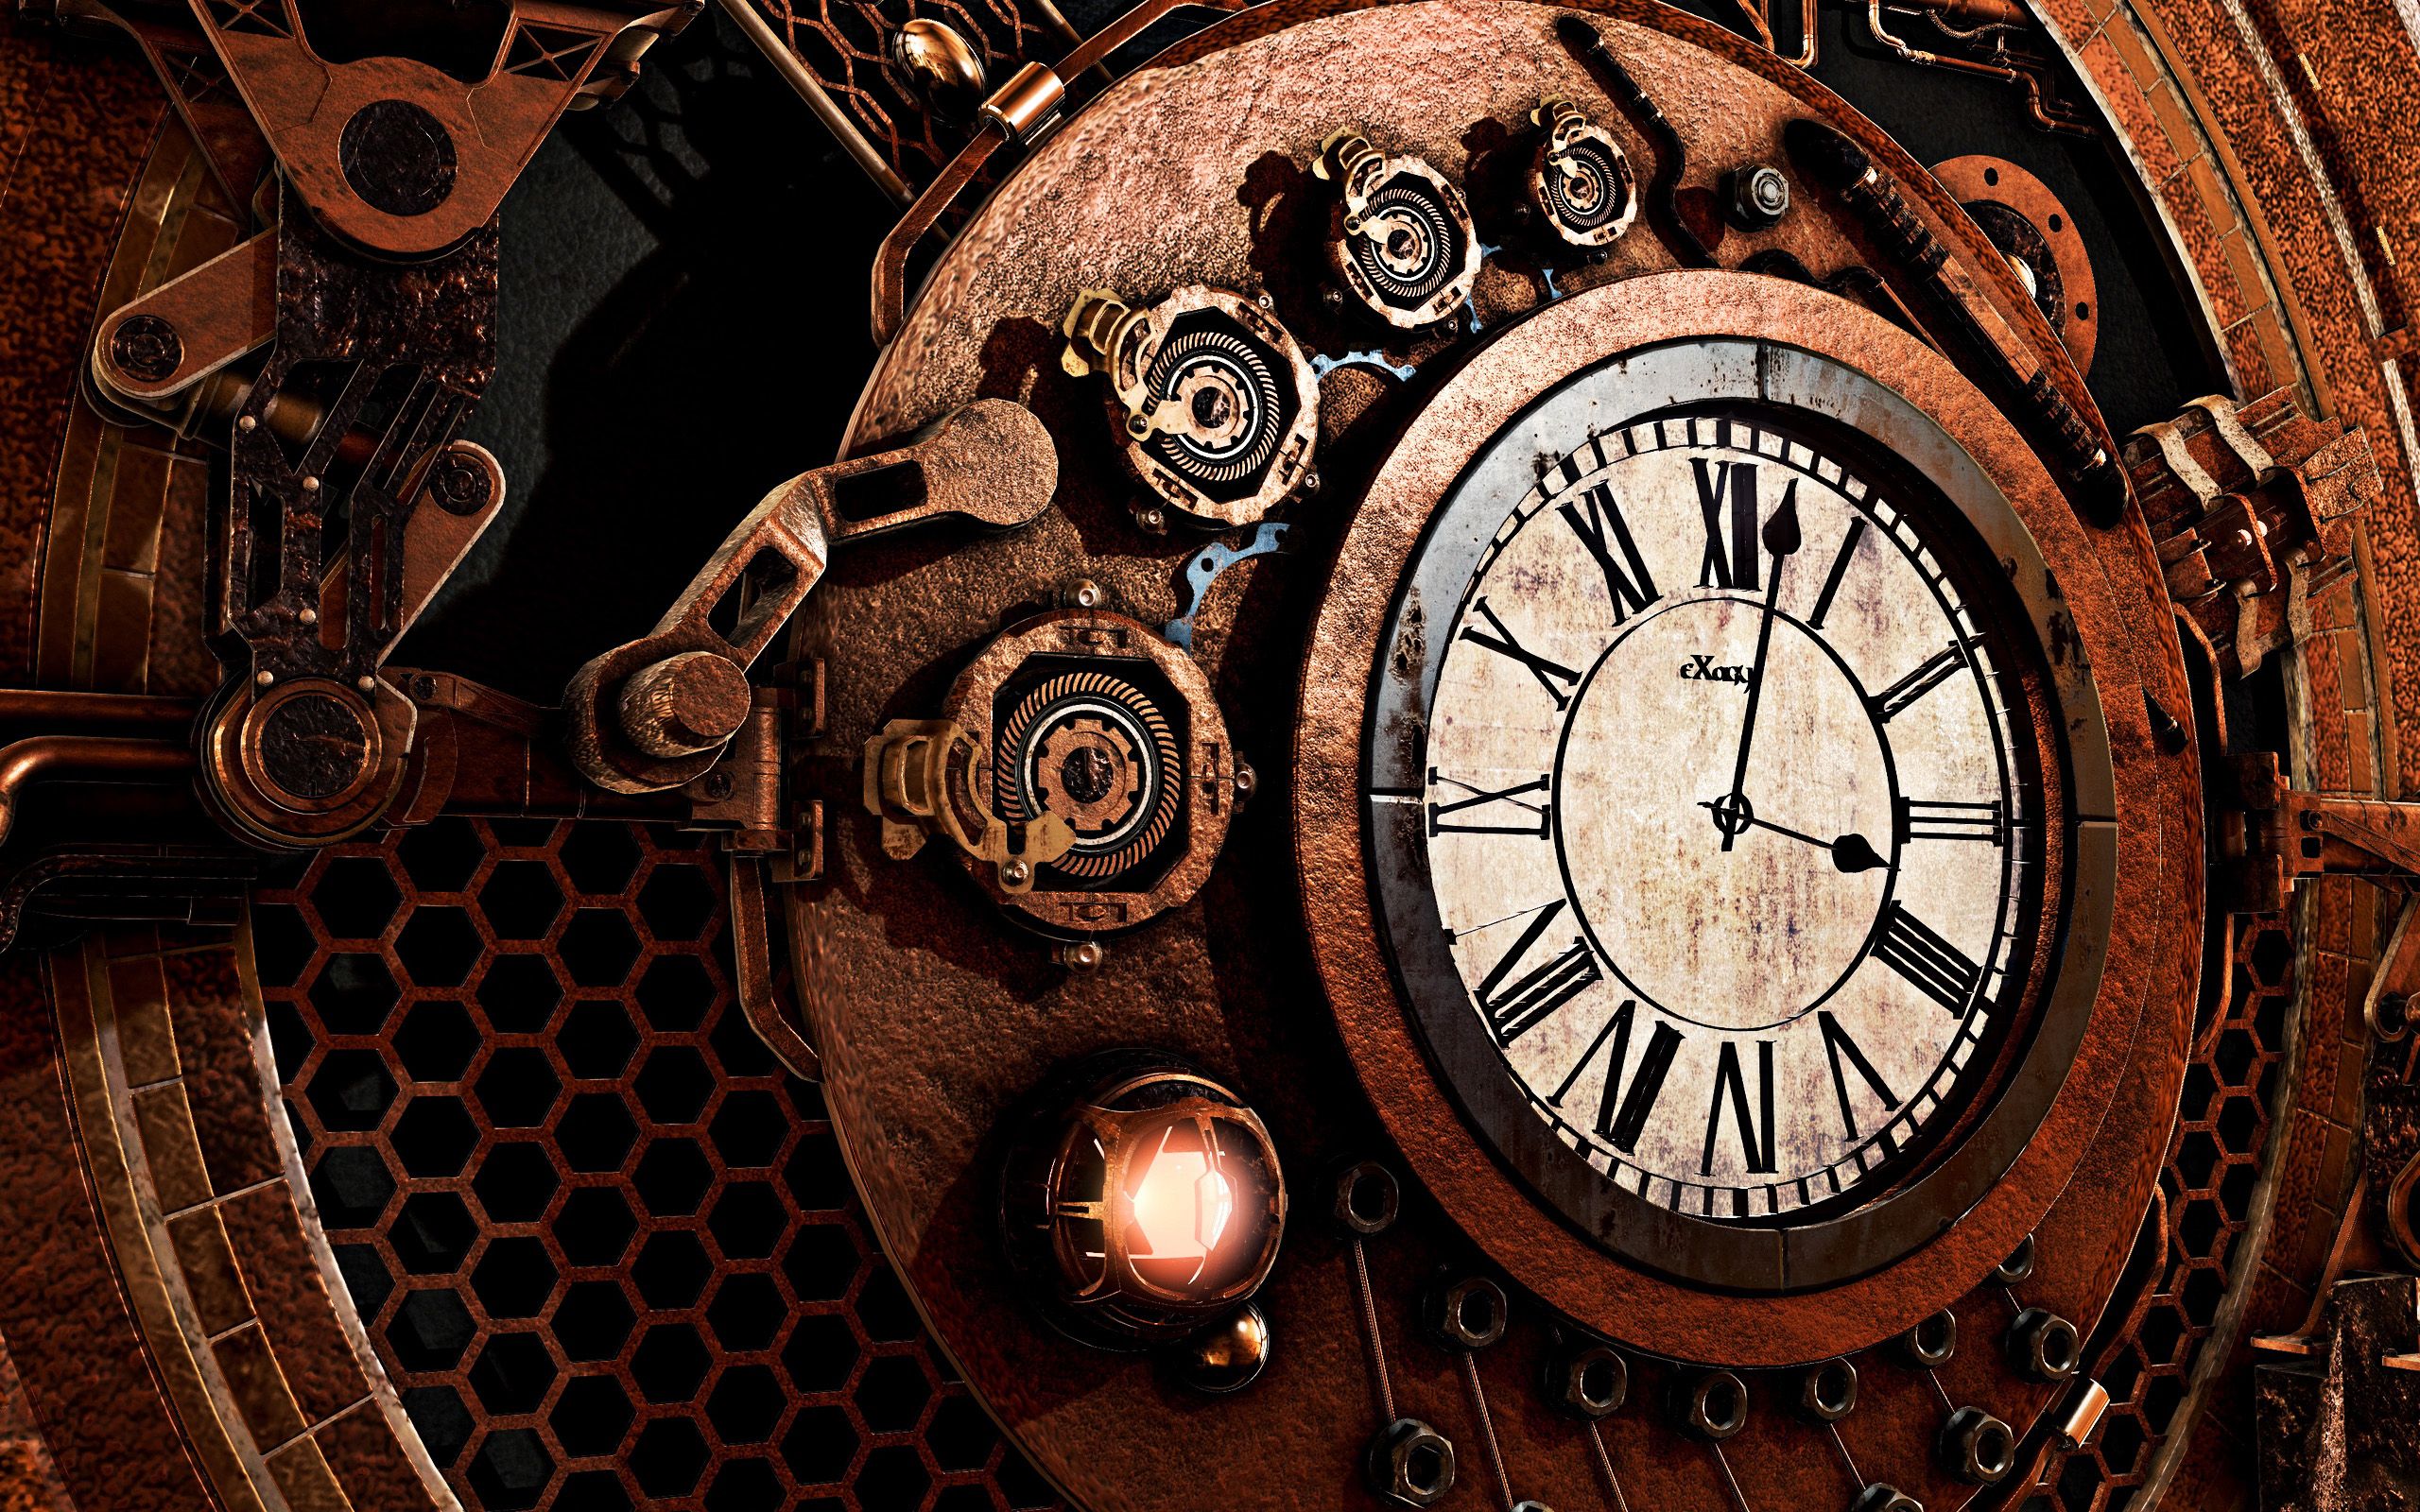 Download wallpaper old clock, retro, time concepts, clock mechanism, metal clock for desktop with resolution 2560x1600. High Quality HD picture wallpaper